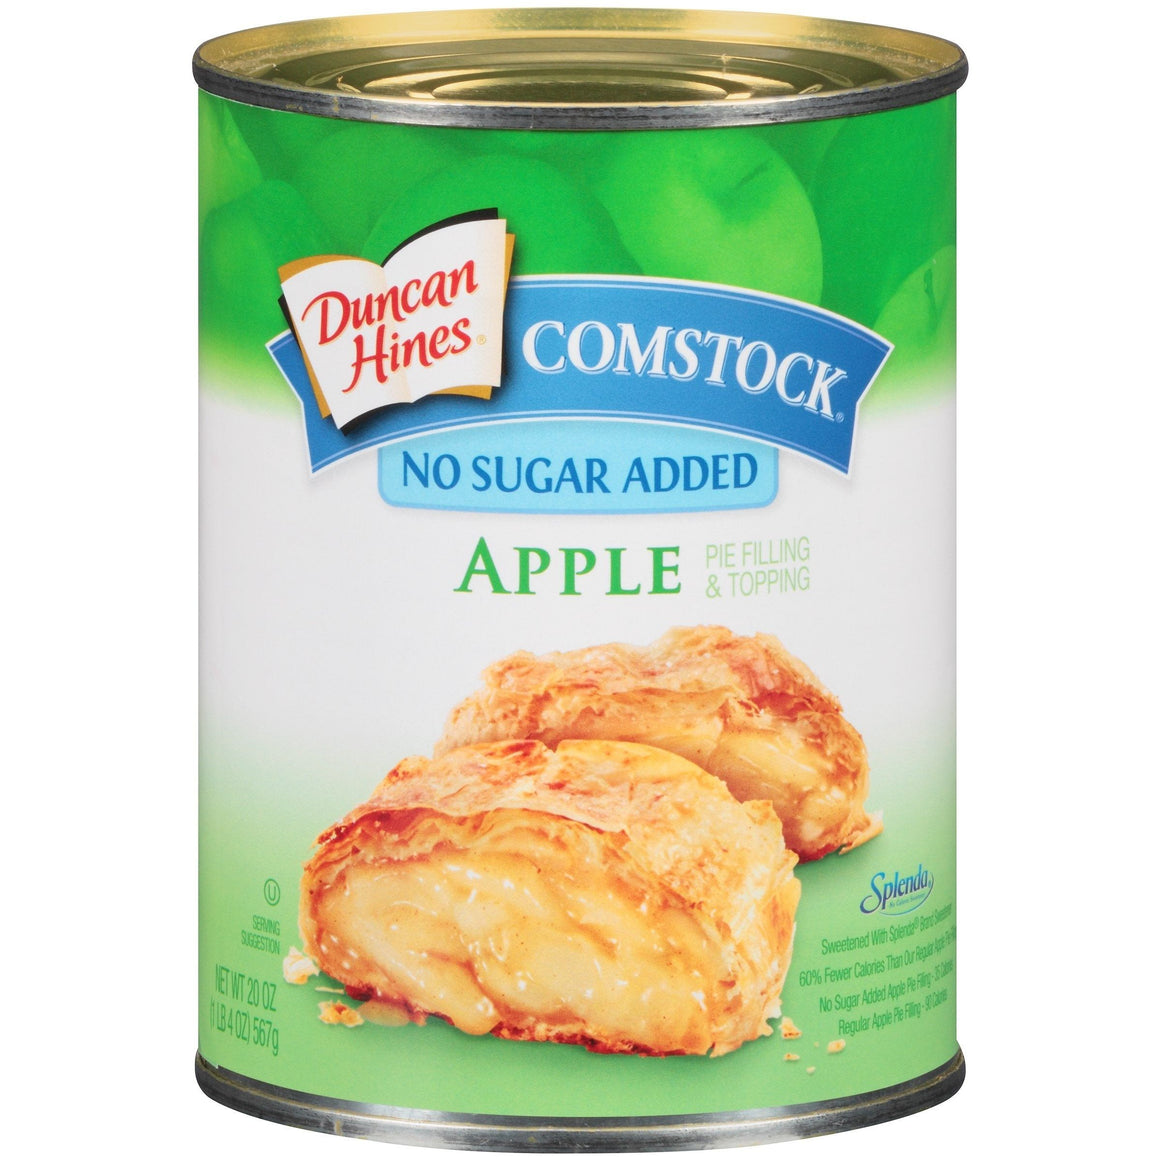 Duncan Hines Comstock - No Sugar Added Pie Filling and Topping - Apple - 20 oz